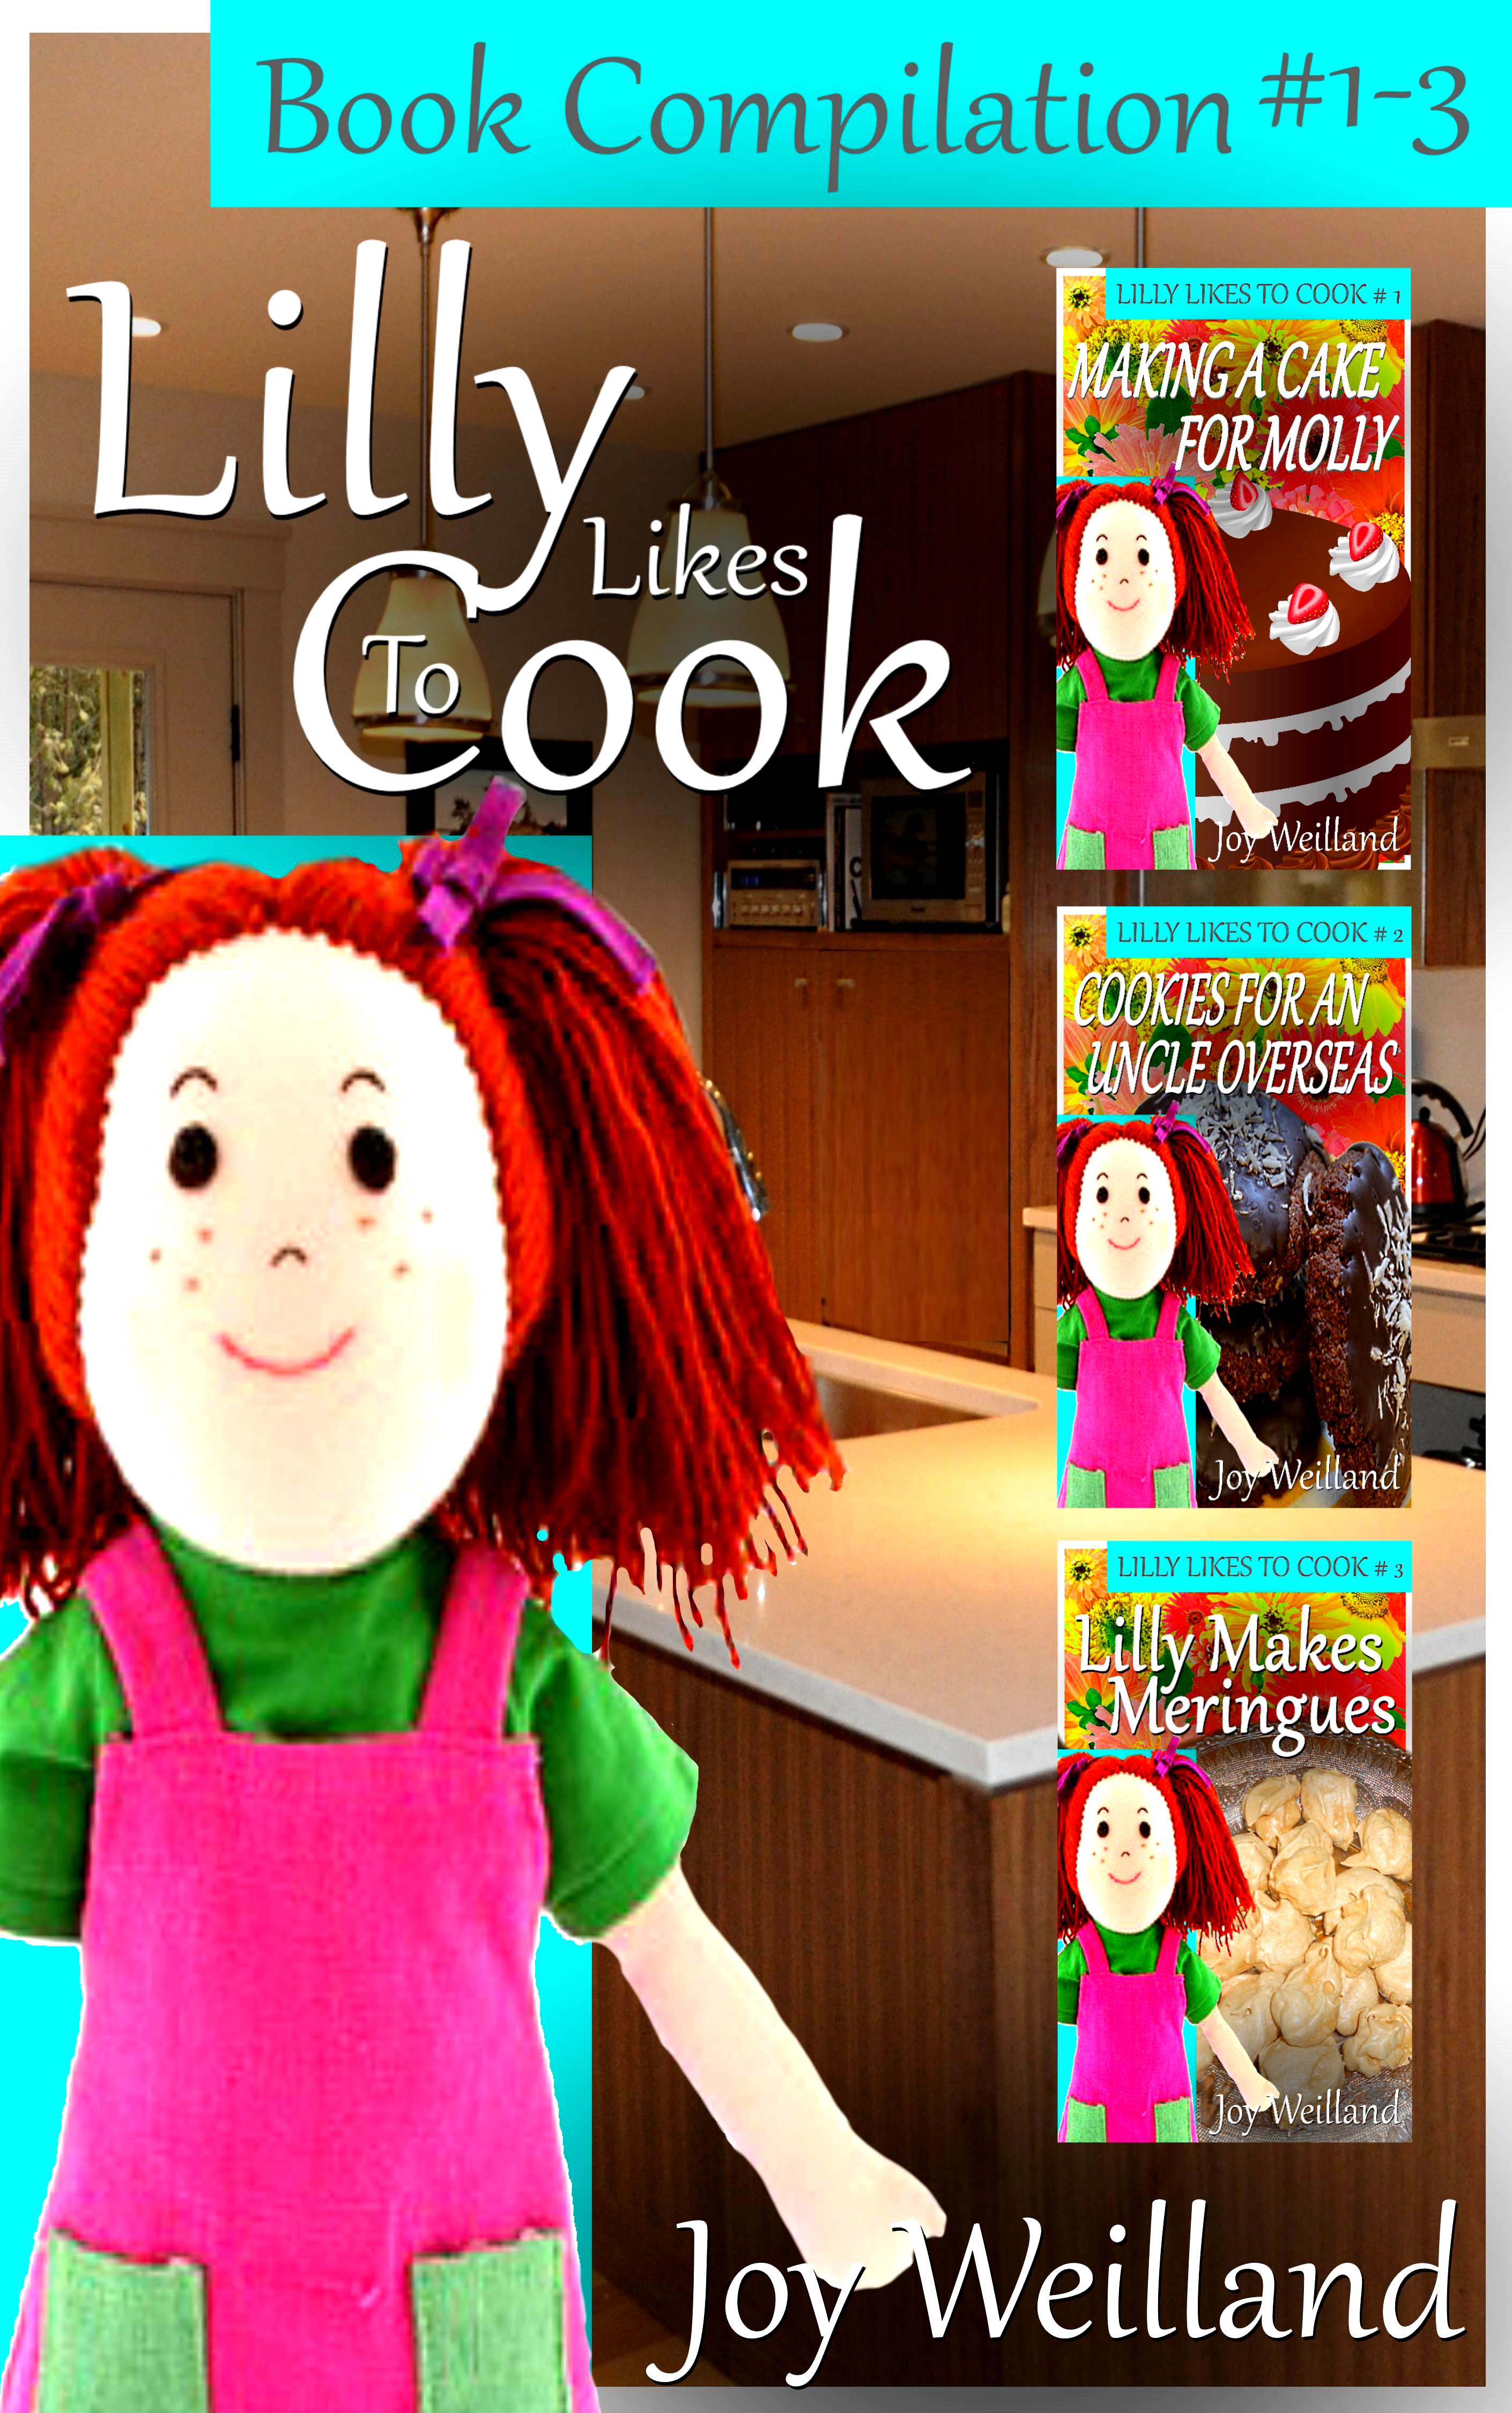 Lilly Likes to cook, Books 1,2,3